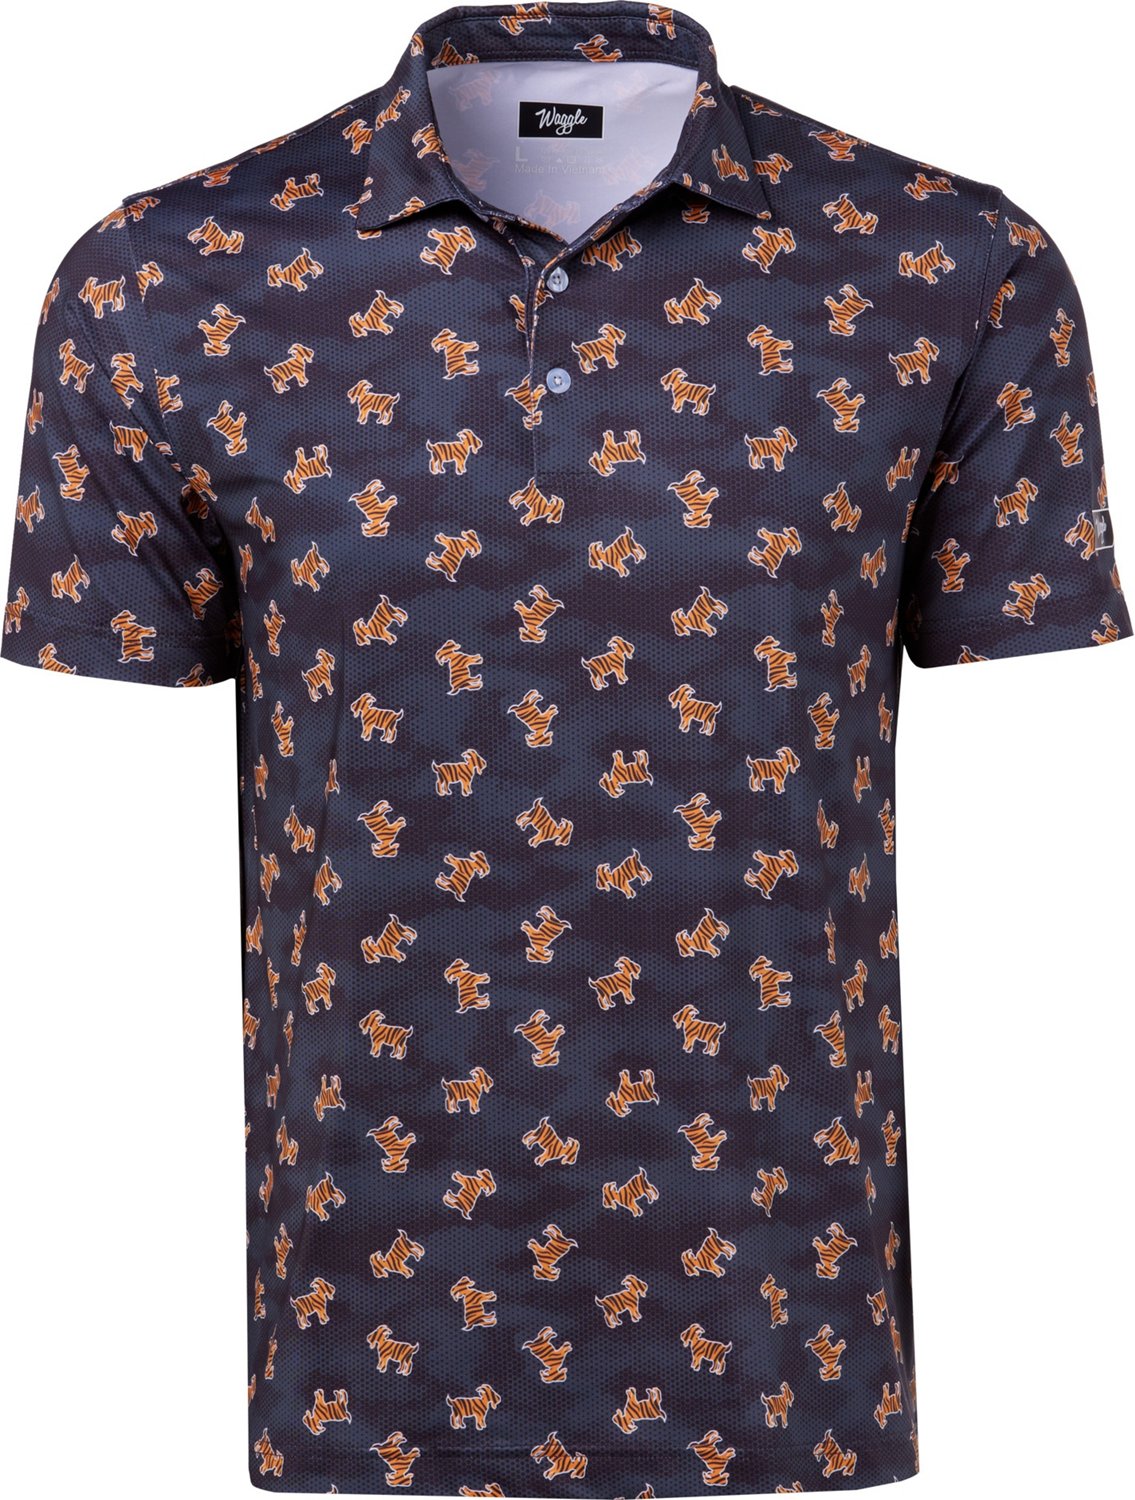 Waggle Men's The GOAT Polo Shirt | Free Shipping at Academy